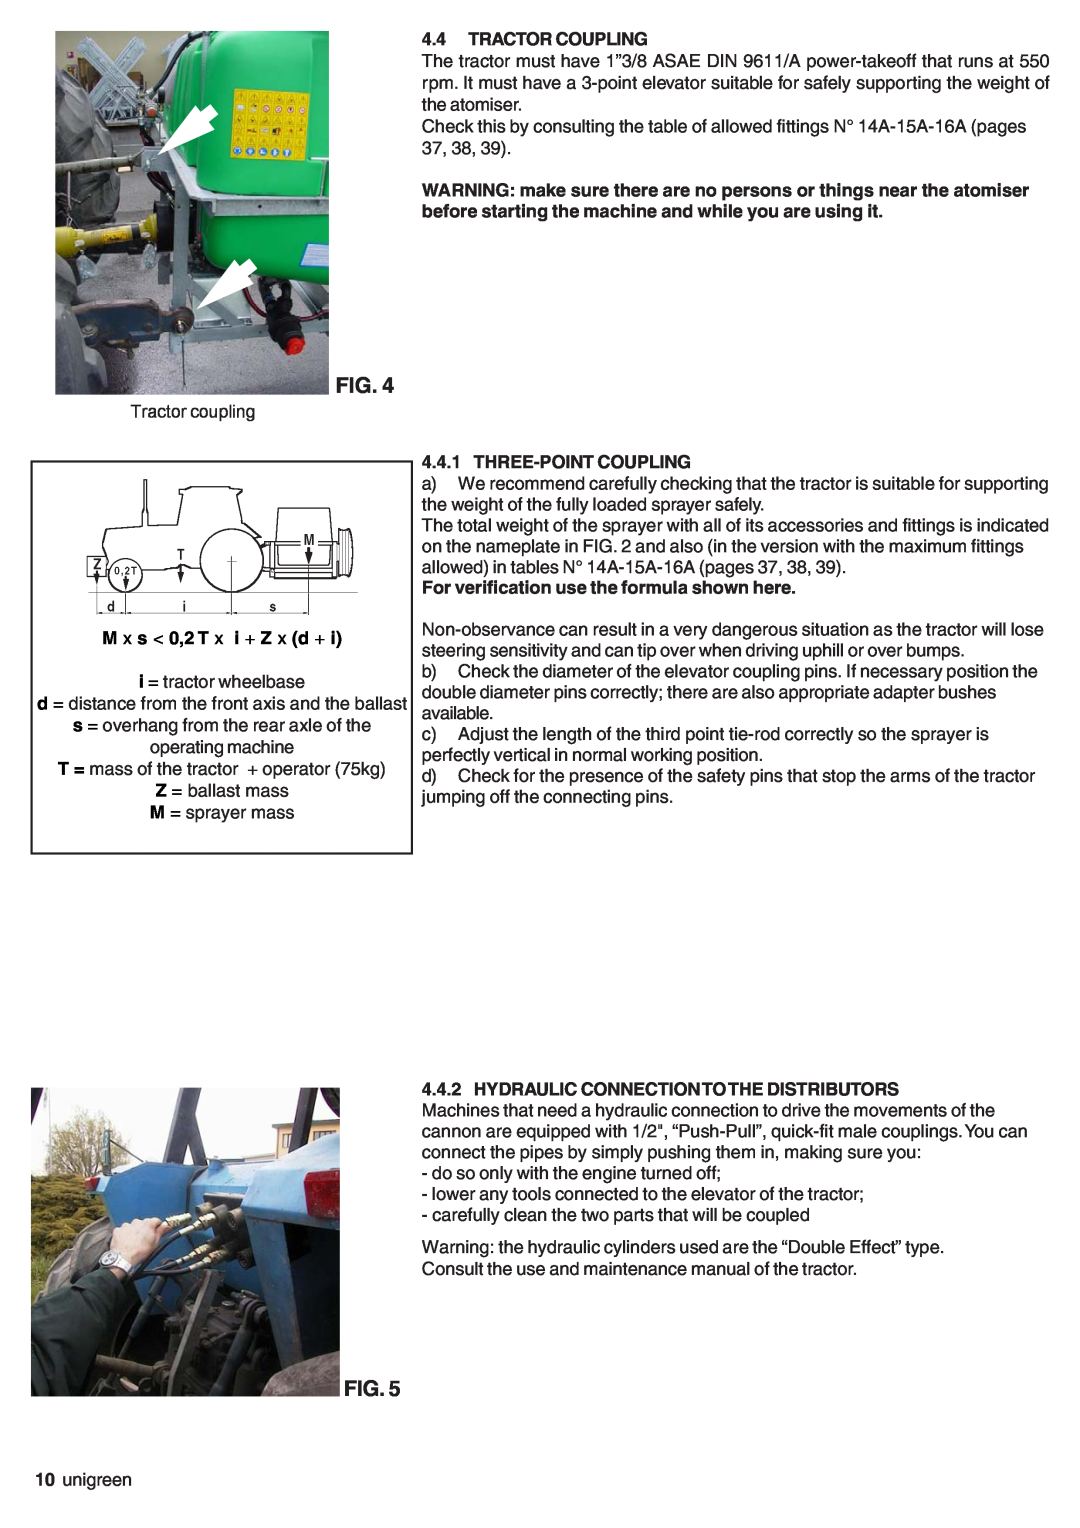 Unigreen SIRIO, EXPO, serie EOLO manual 4.4TRACTOR COUPLING, Three-Pointcoupling, For verification use the formula shown here 